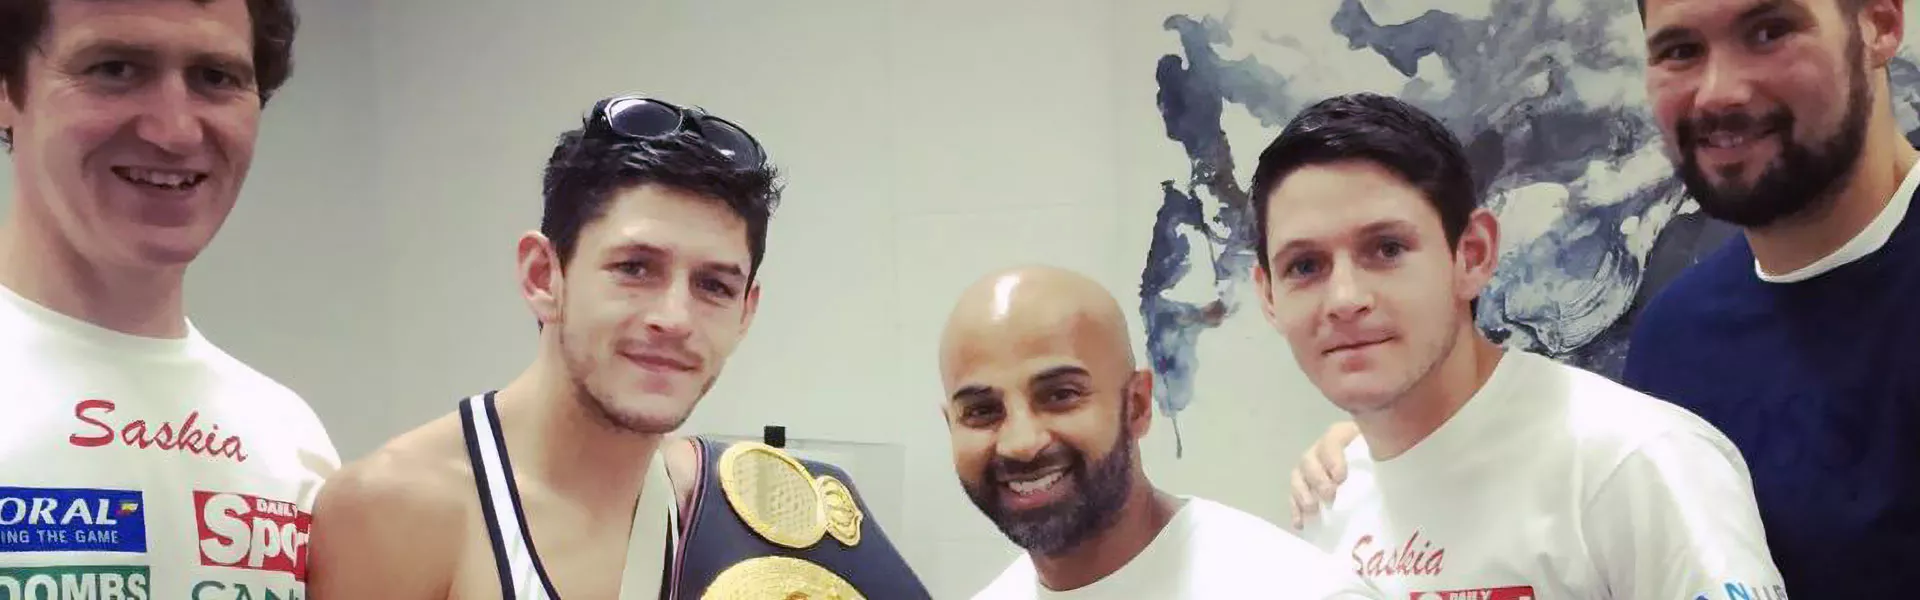 CANNA sponsors 2-Time World Champion boxing Jamie McDonnell